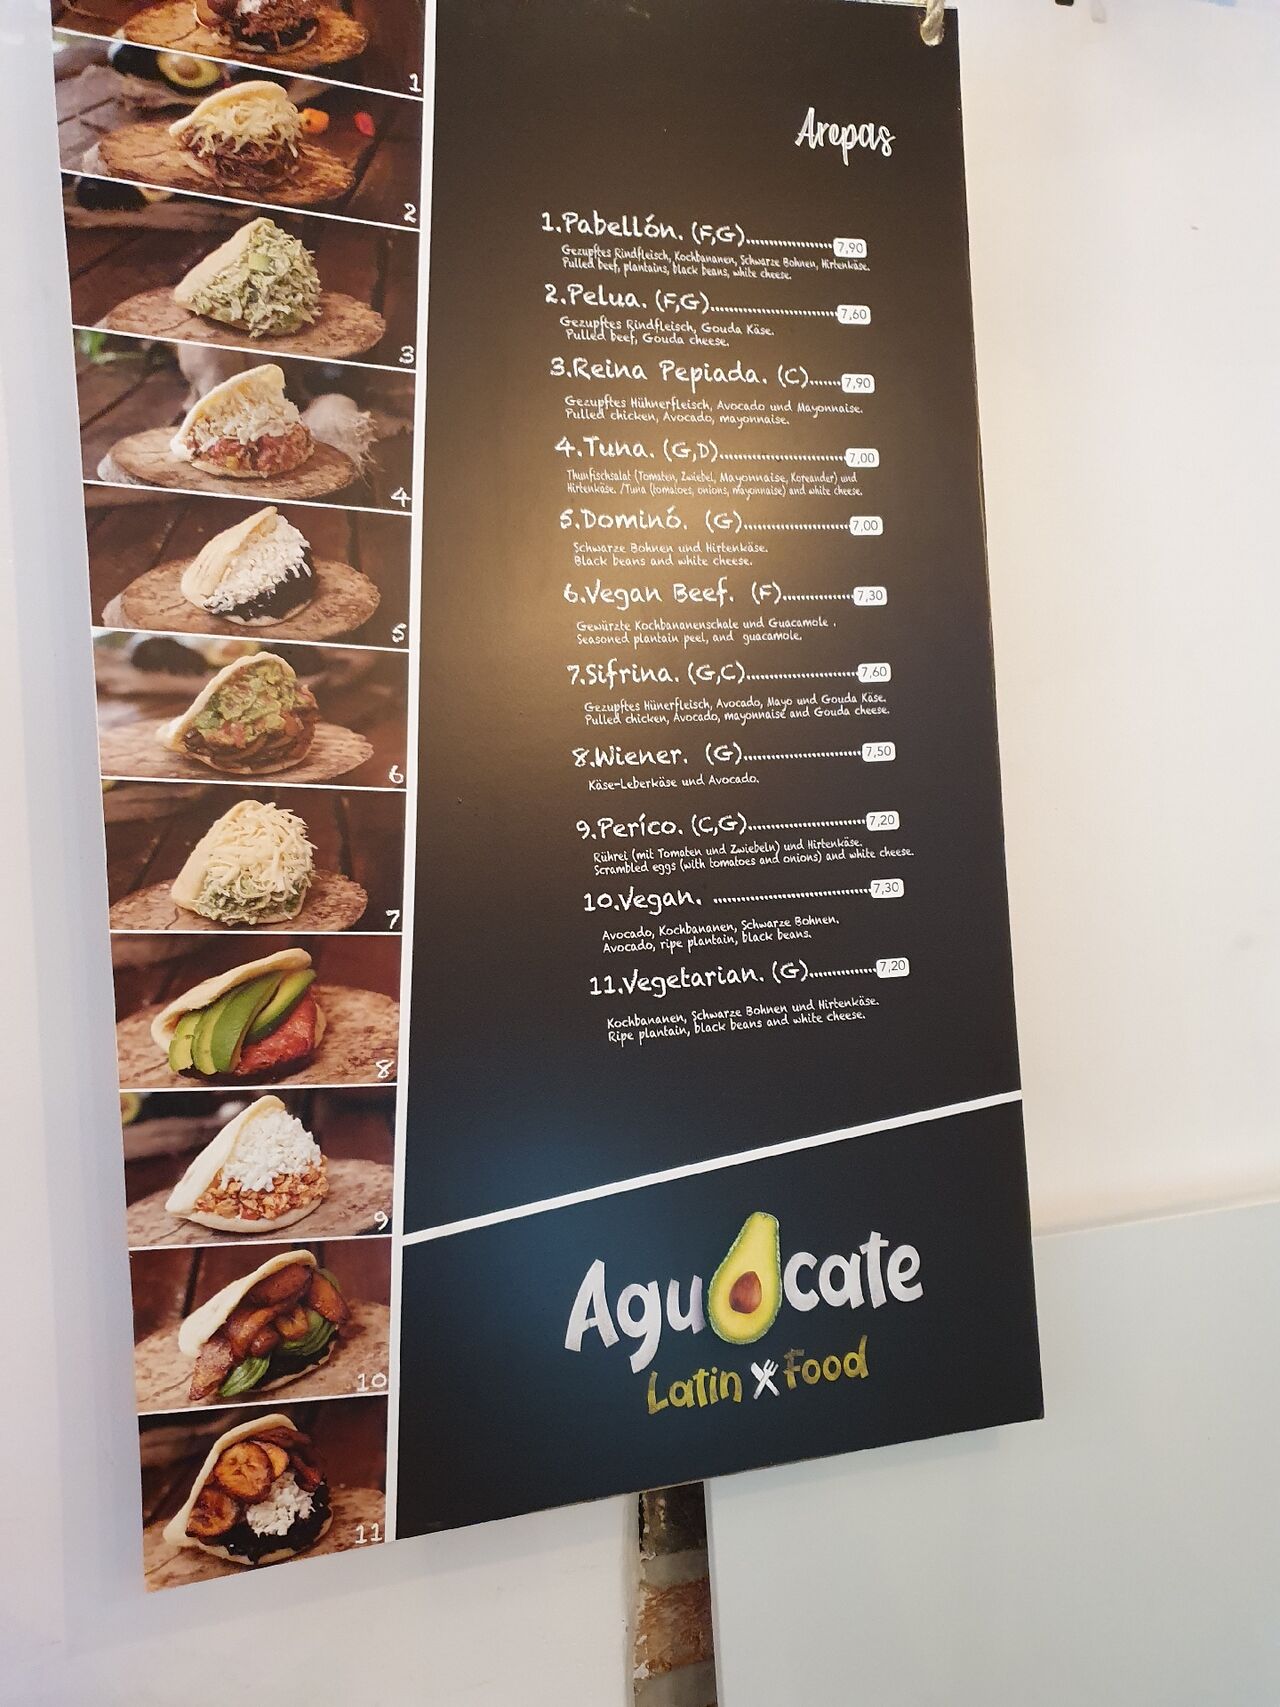 A photo of Aguacate